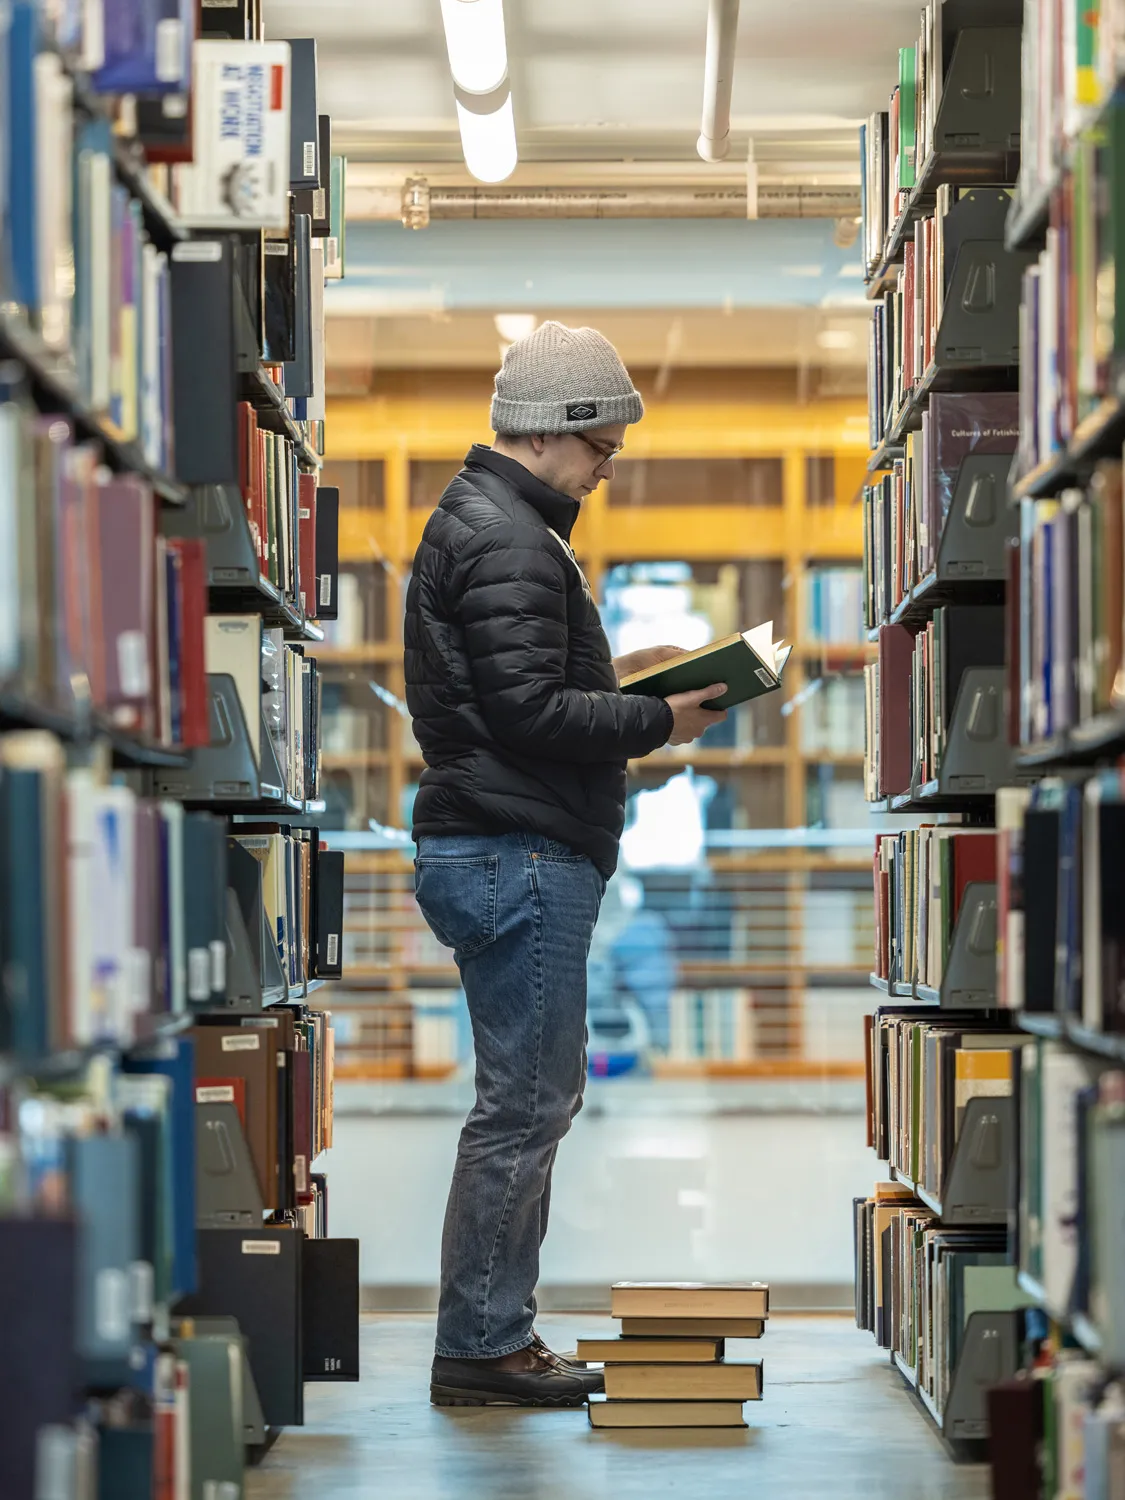 A white man in winter coat and hat focuses as he pages through a book in the stacks (which means he is standing between two closely placed rows of shelves, each chock full of research books). He is near the glass wall that looks into the main lobby. Five thick books sit in a stack at his feet. 